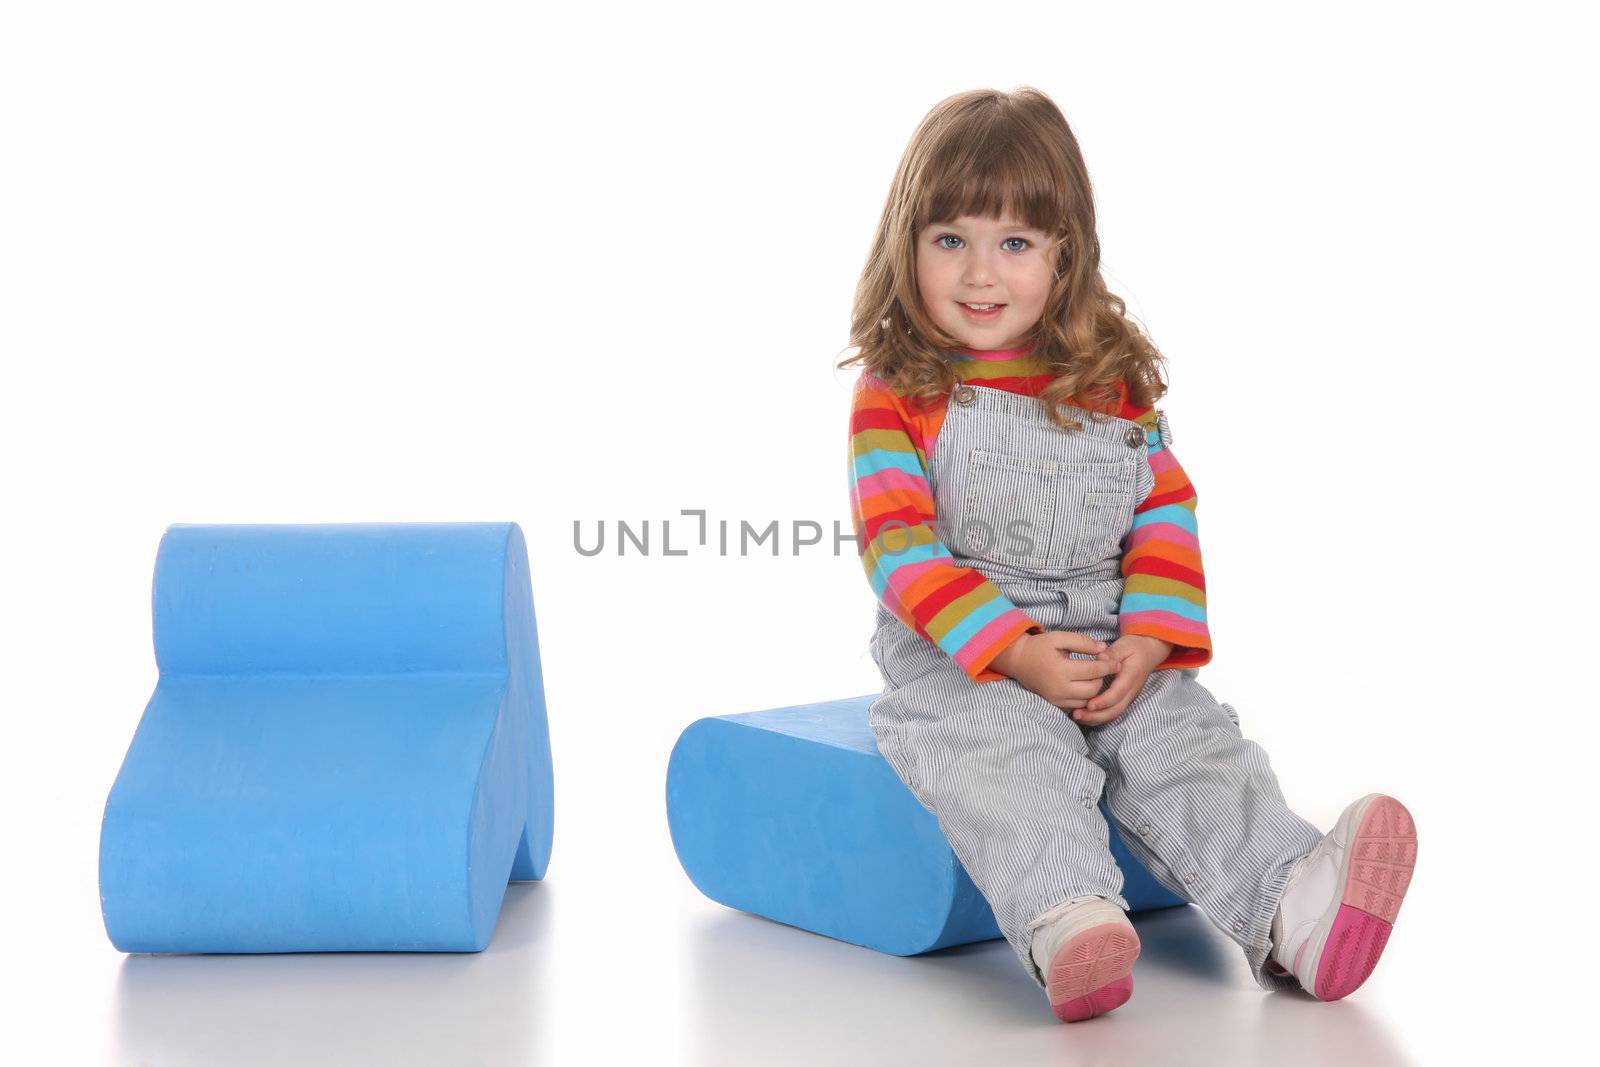 beauty a little girl sitting on blue toy box